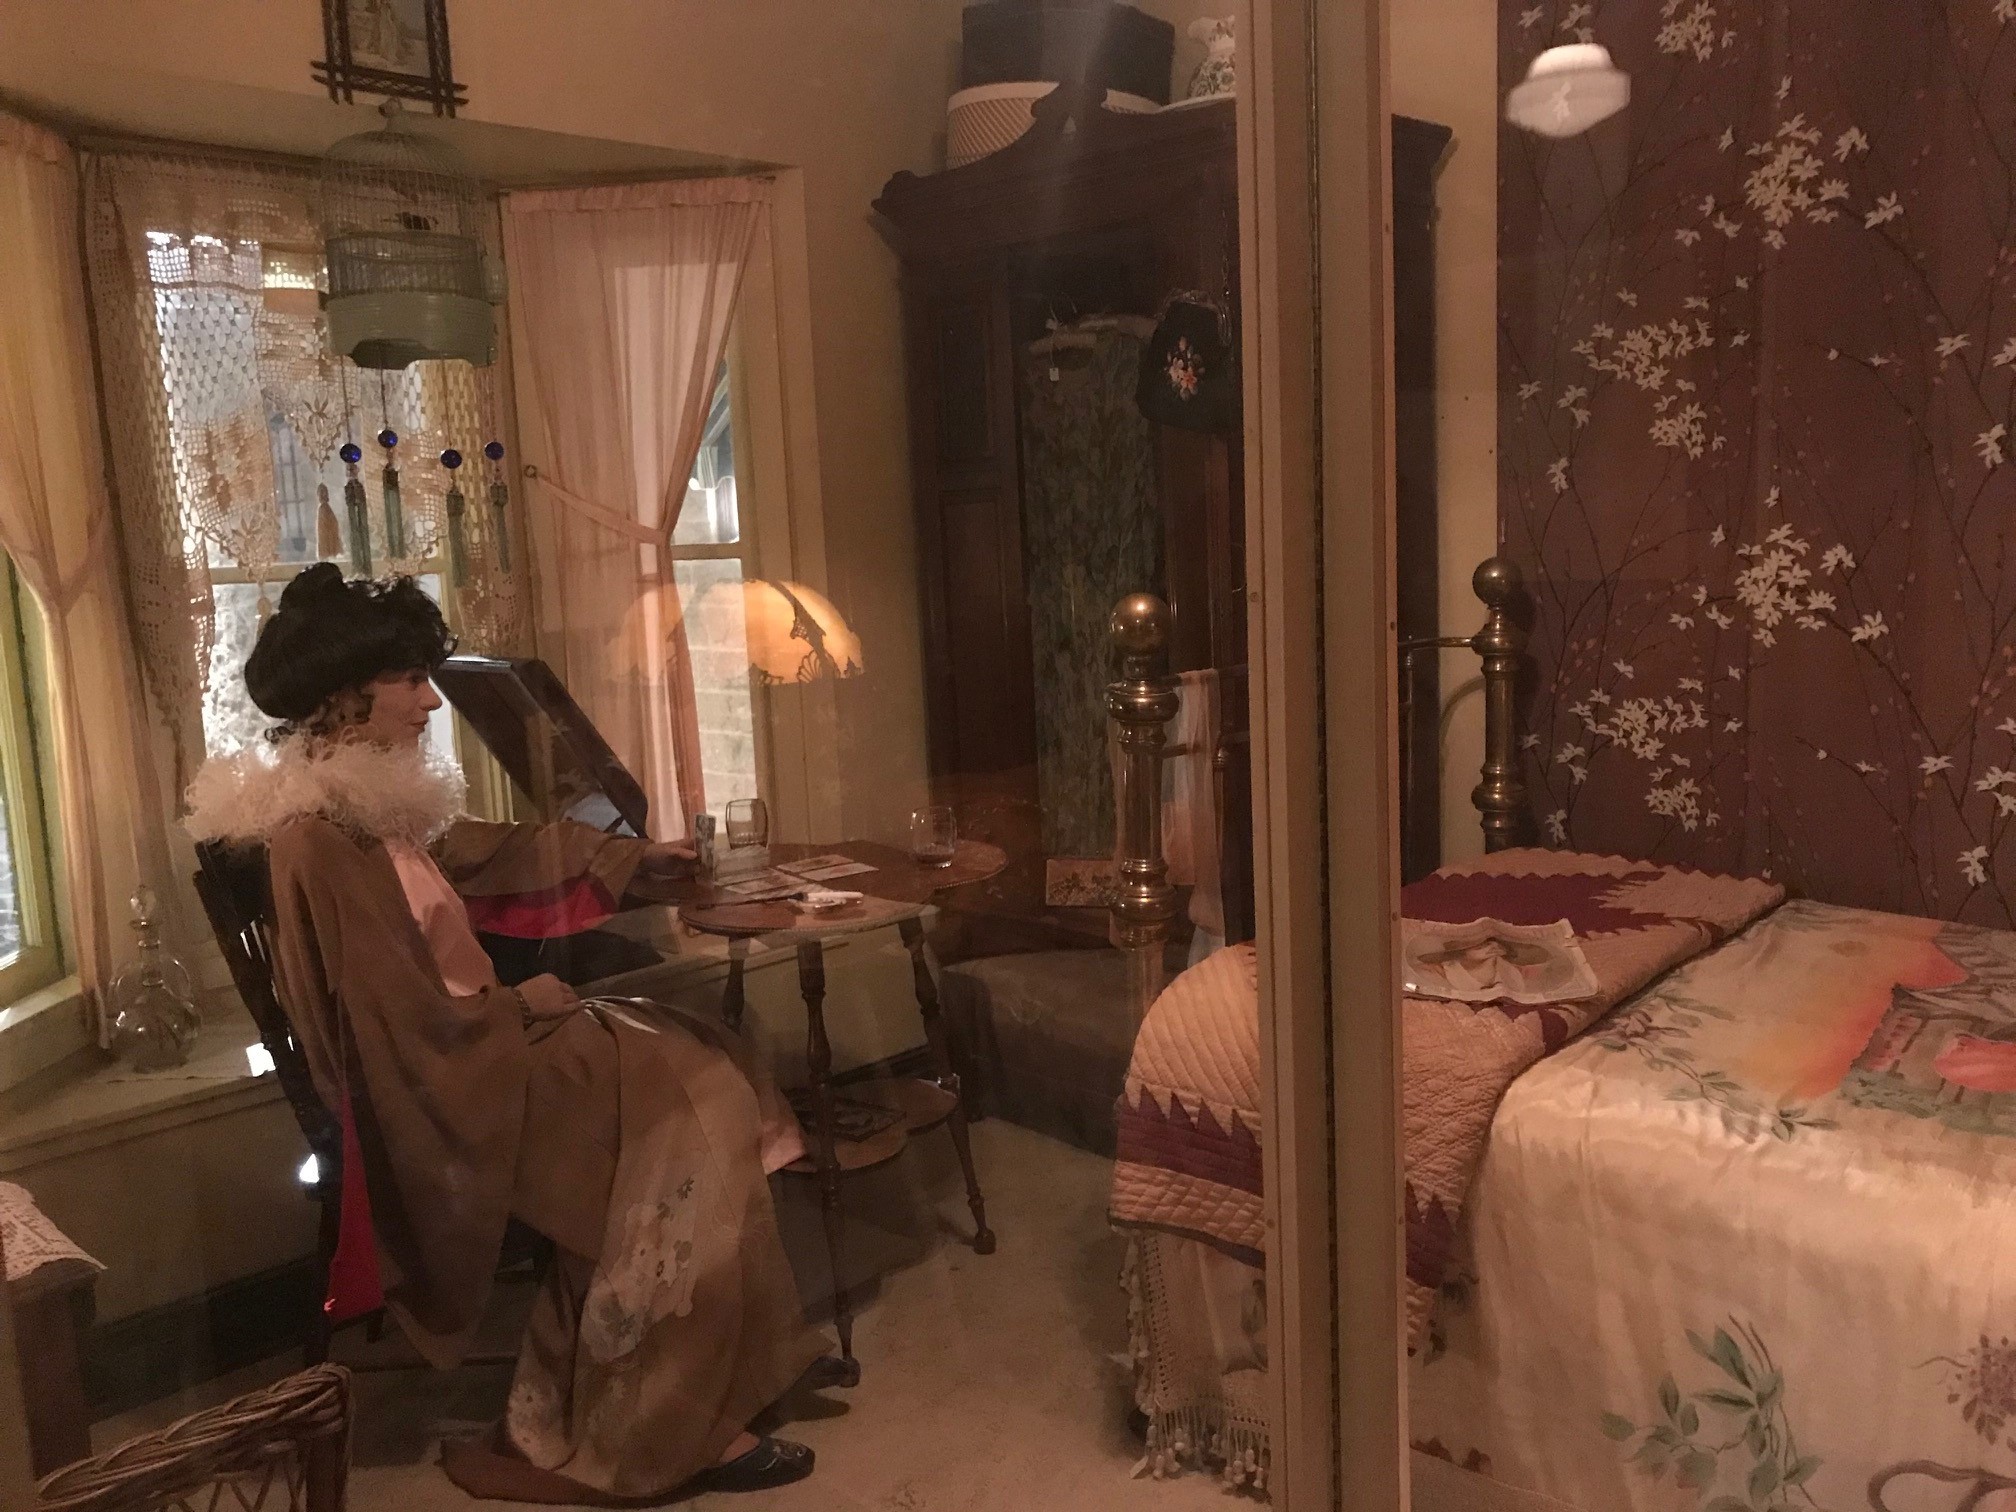 A bedroom. A mannequin of a woman from behind wearing a robe and ruff is seated at a small table with tarot cards laid out on it near a bay window. On the right side of the room is a small neatly-made bed with a quilt folded along the foot. A wardrobe is in the corner across from the centre of frame.